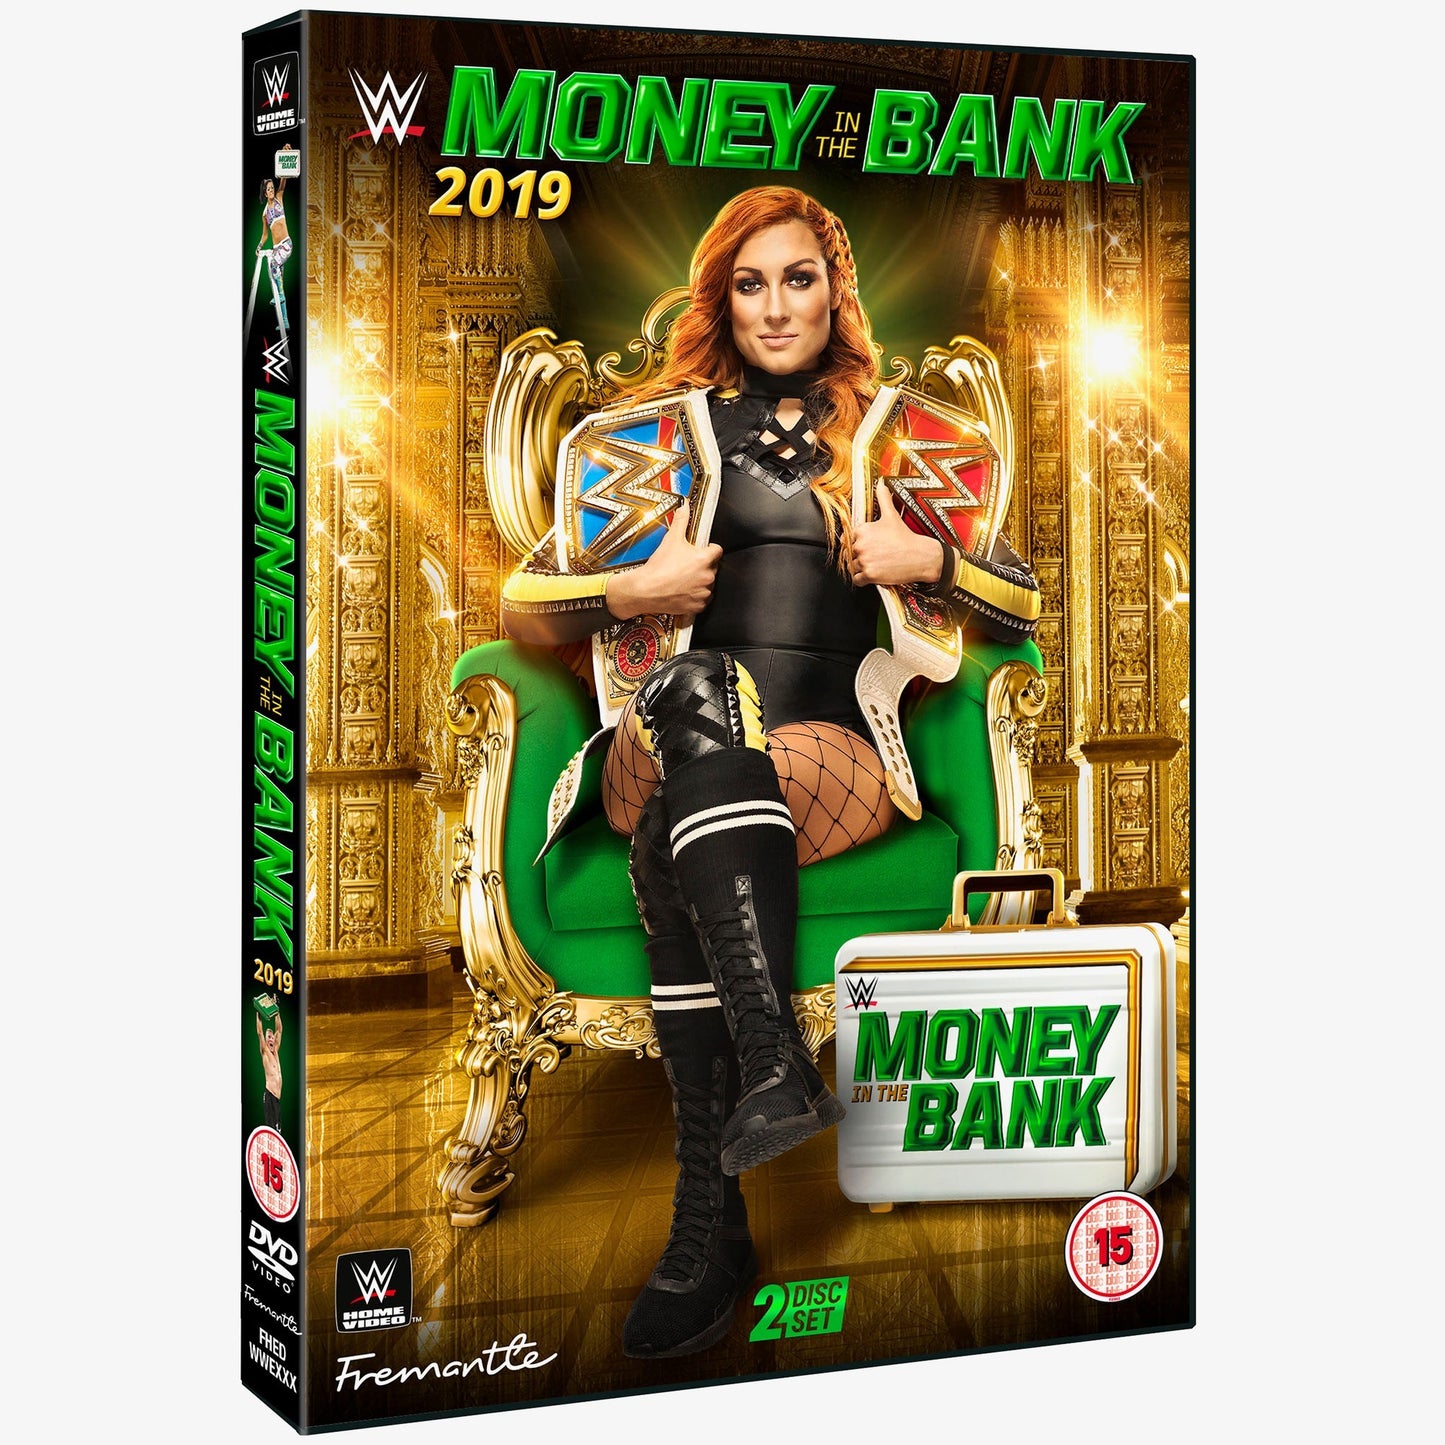 WWE Money in the Bank 2019 DVD